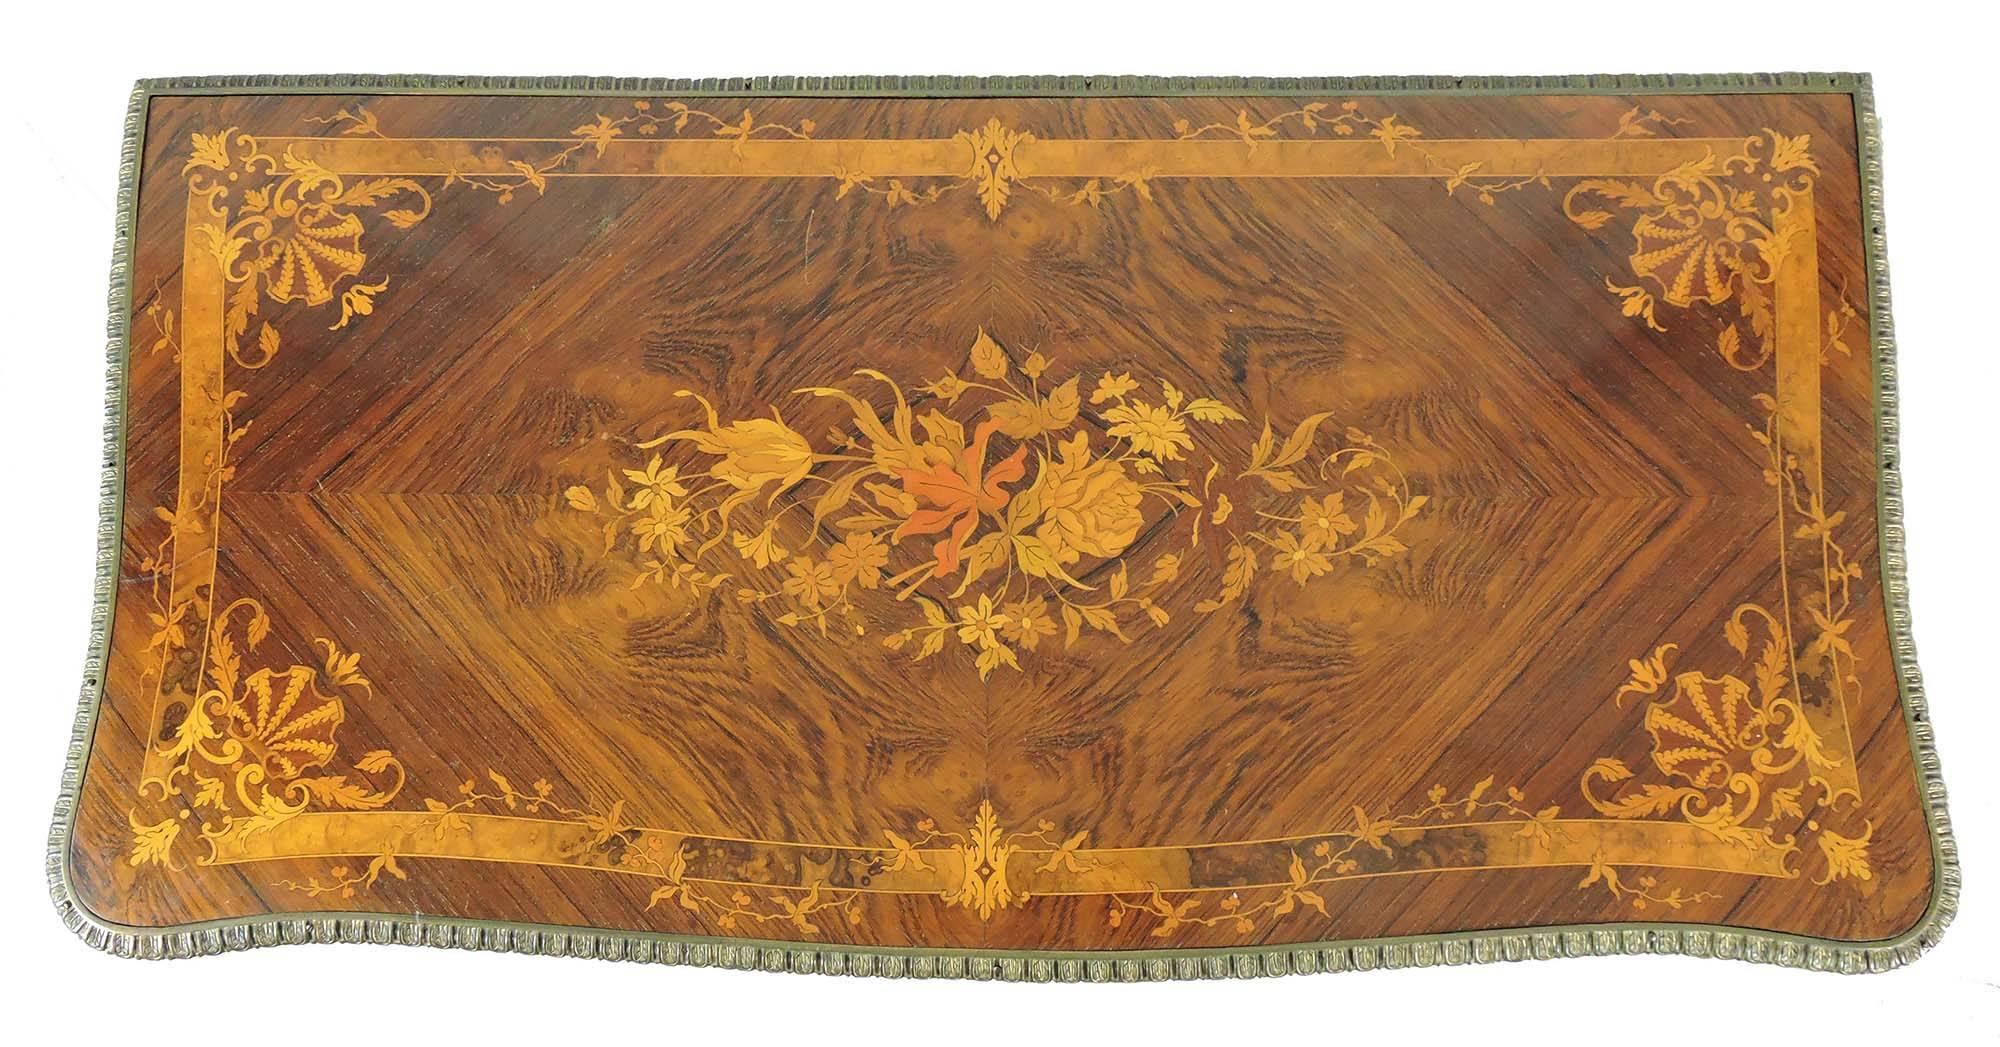 We offer a French Louis XV style European walnut games table on cabriole legs, with gilt bronze mounts. The top and side panels are inlaid with fine floral and scrollwork marquetry in satinwood, fruitwoods, and burled walnut throughout a European